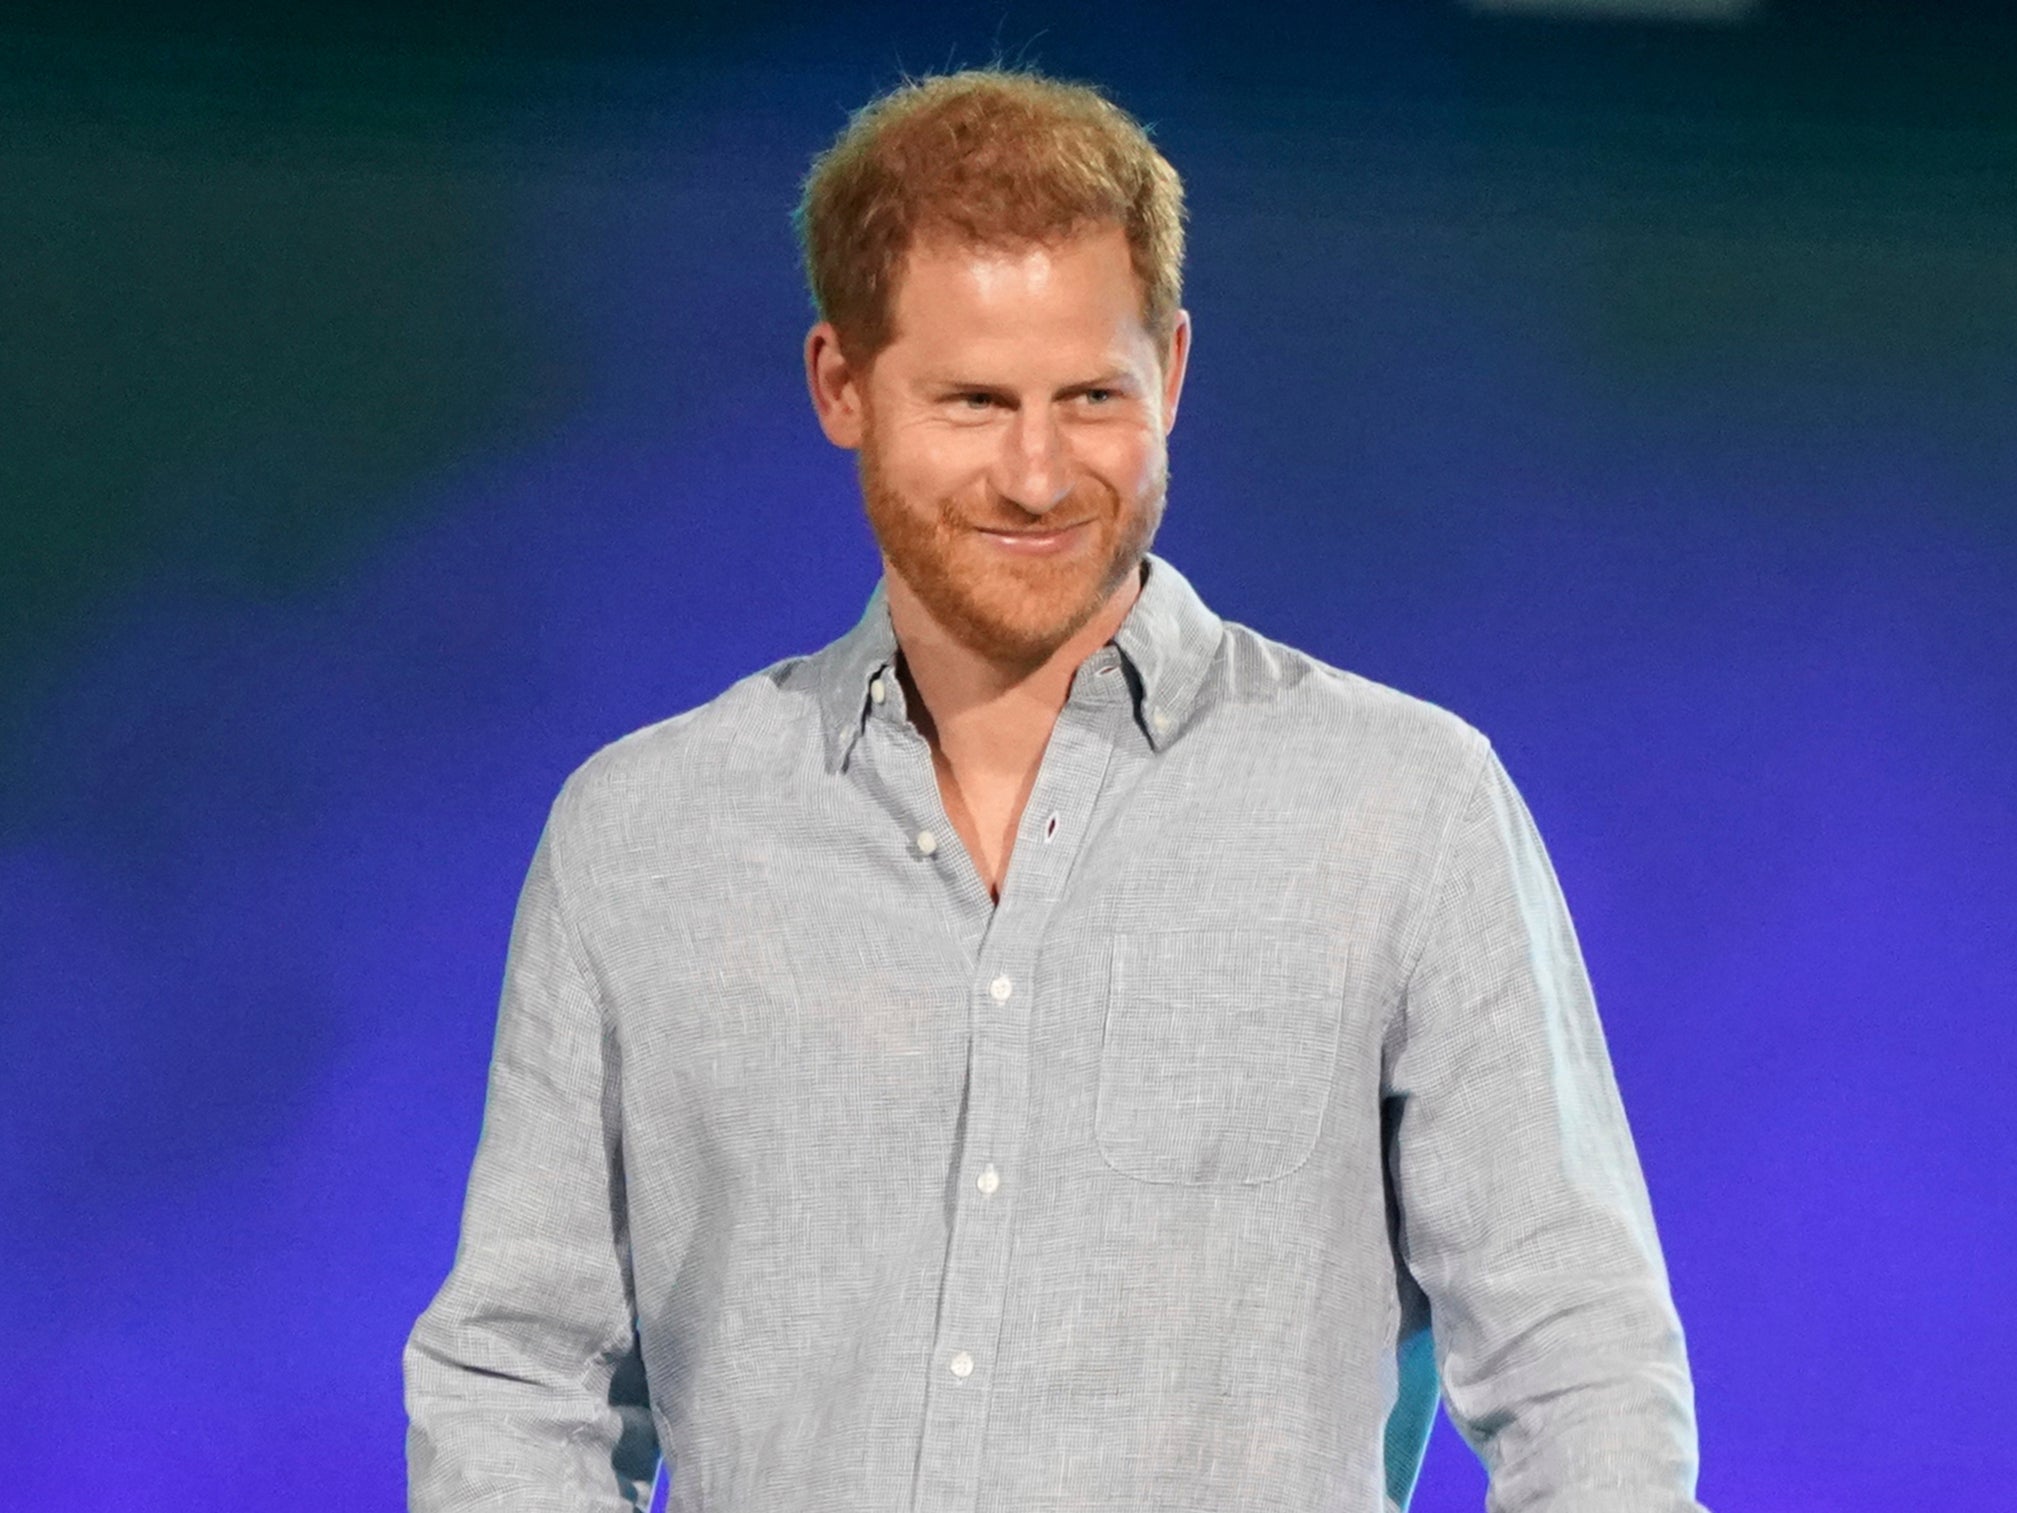 Prince Harry, Duke of Sussex speaks at ‘Vax Live: The Concert to Reunite the World'